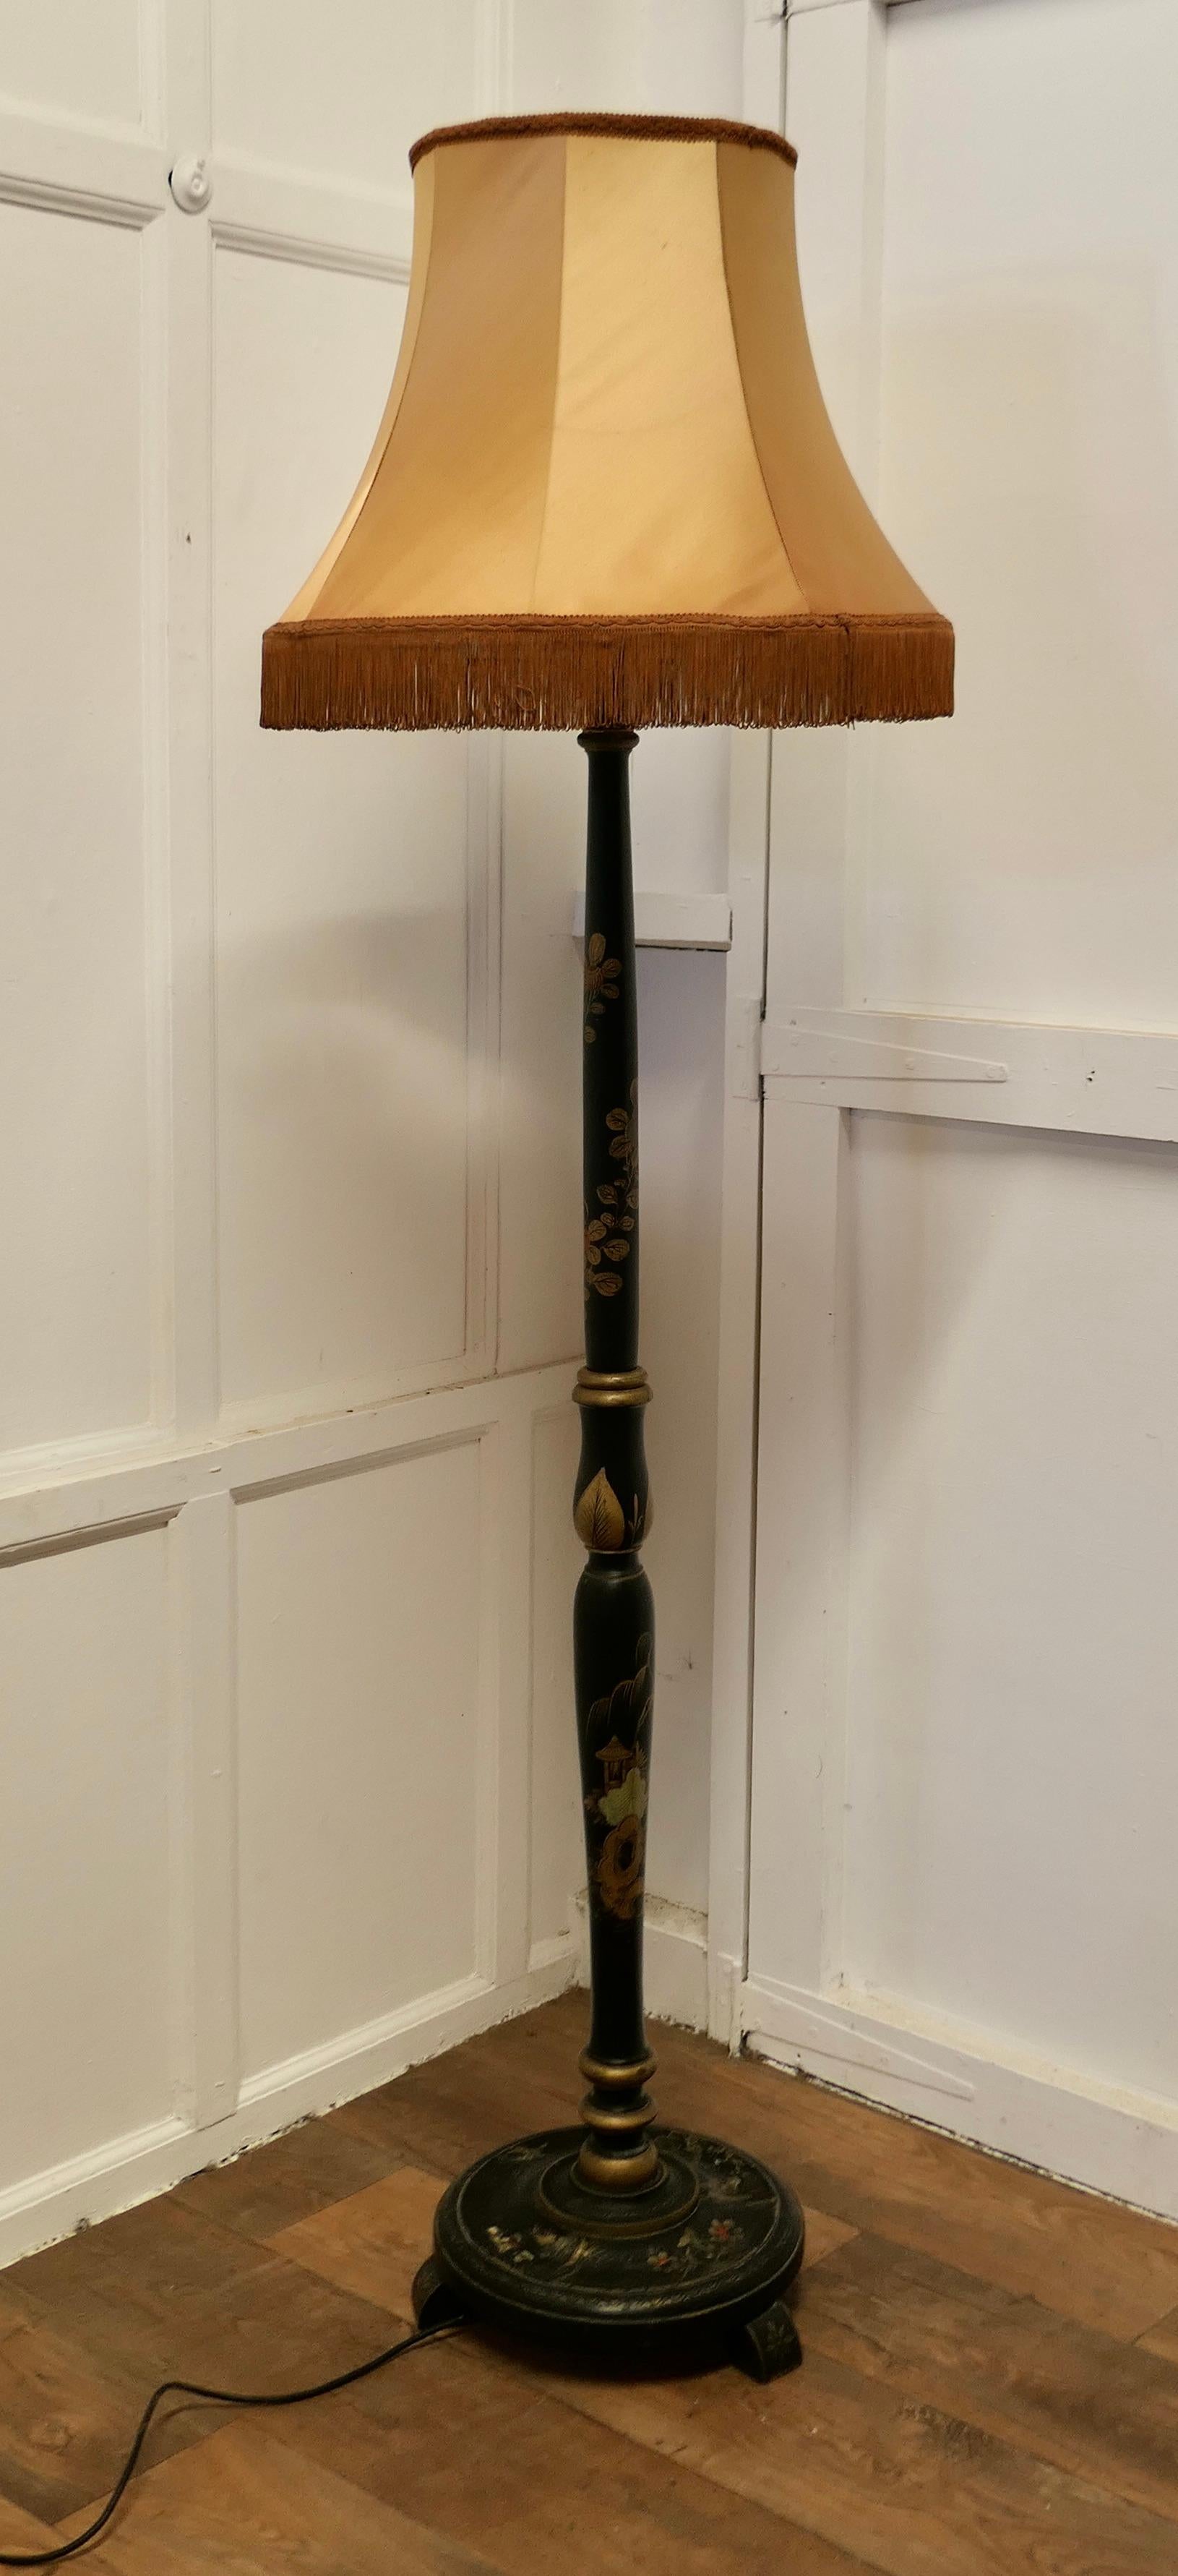 A Black Lacquer and Gold Decorated Standard Lamp

This is a fine quality Chinoiserie lamp it stands on a turned round wooden base which has gold and coloured floral decoration as has the turned upright which has more scenes of flowers 
The lamp has